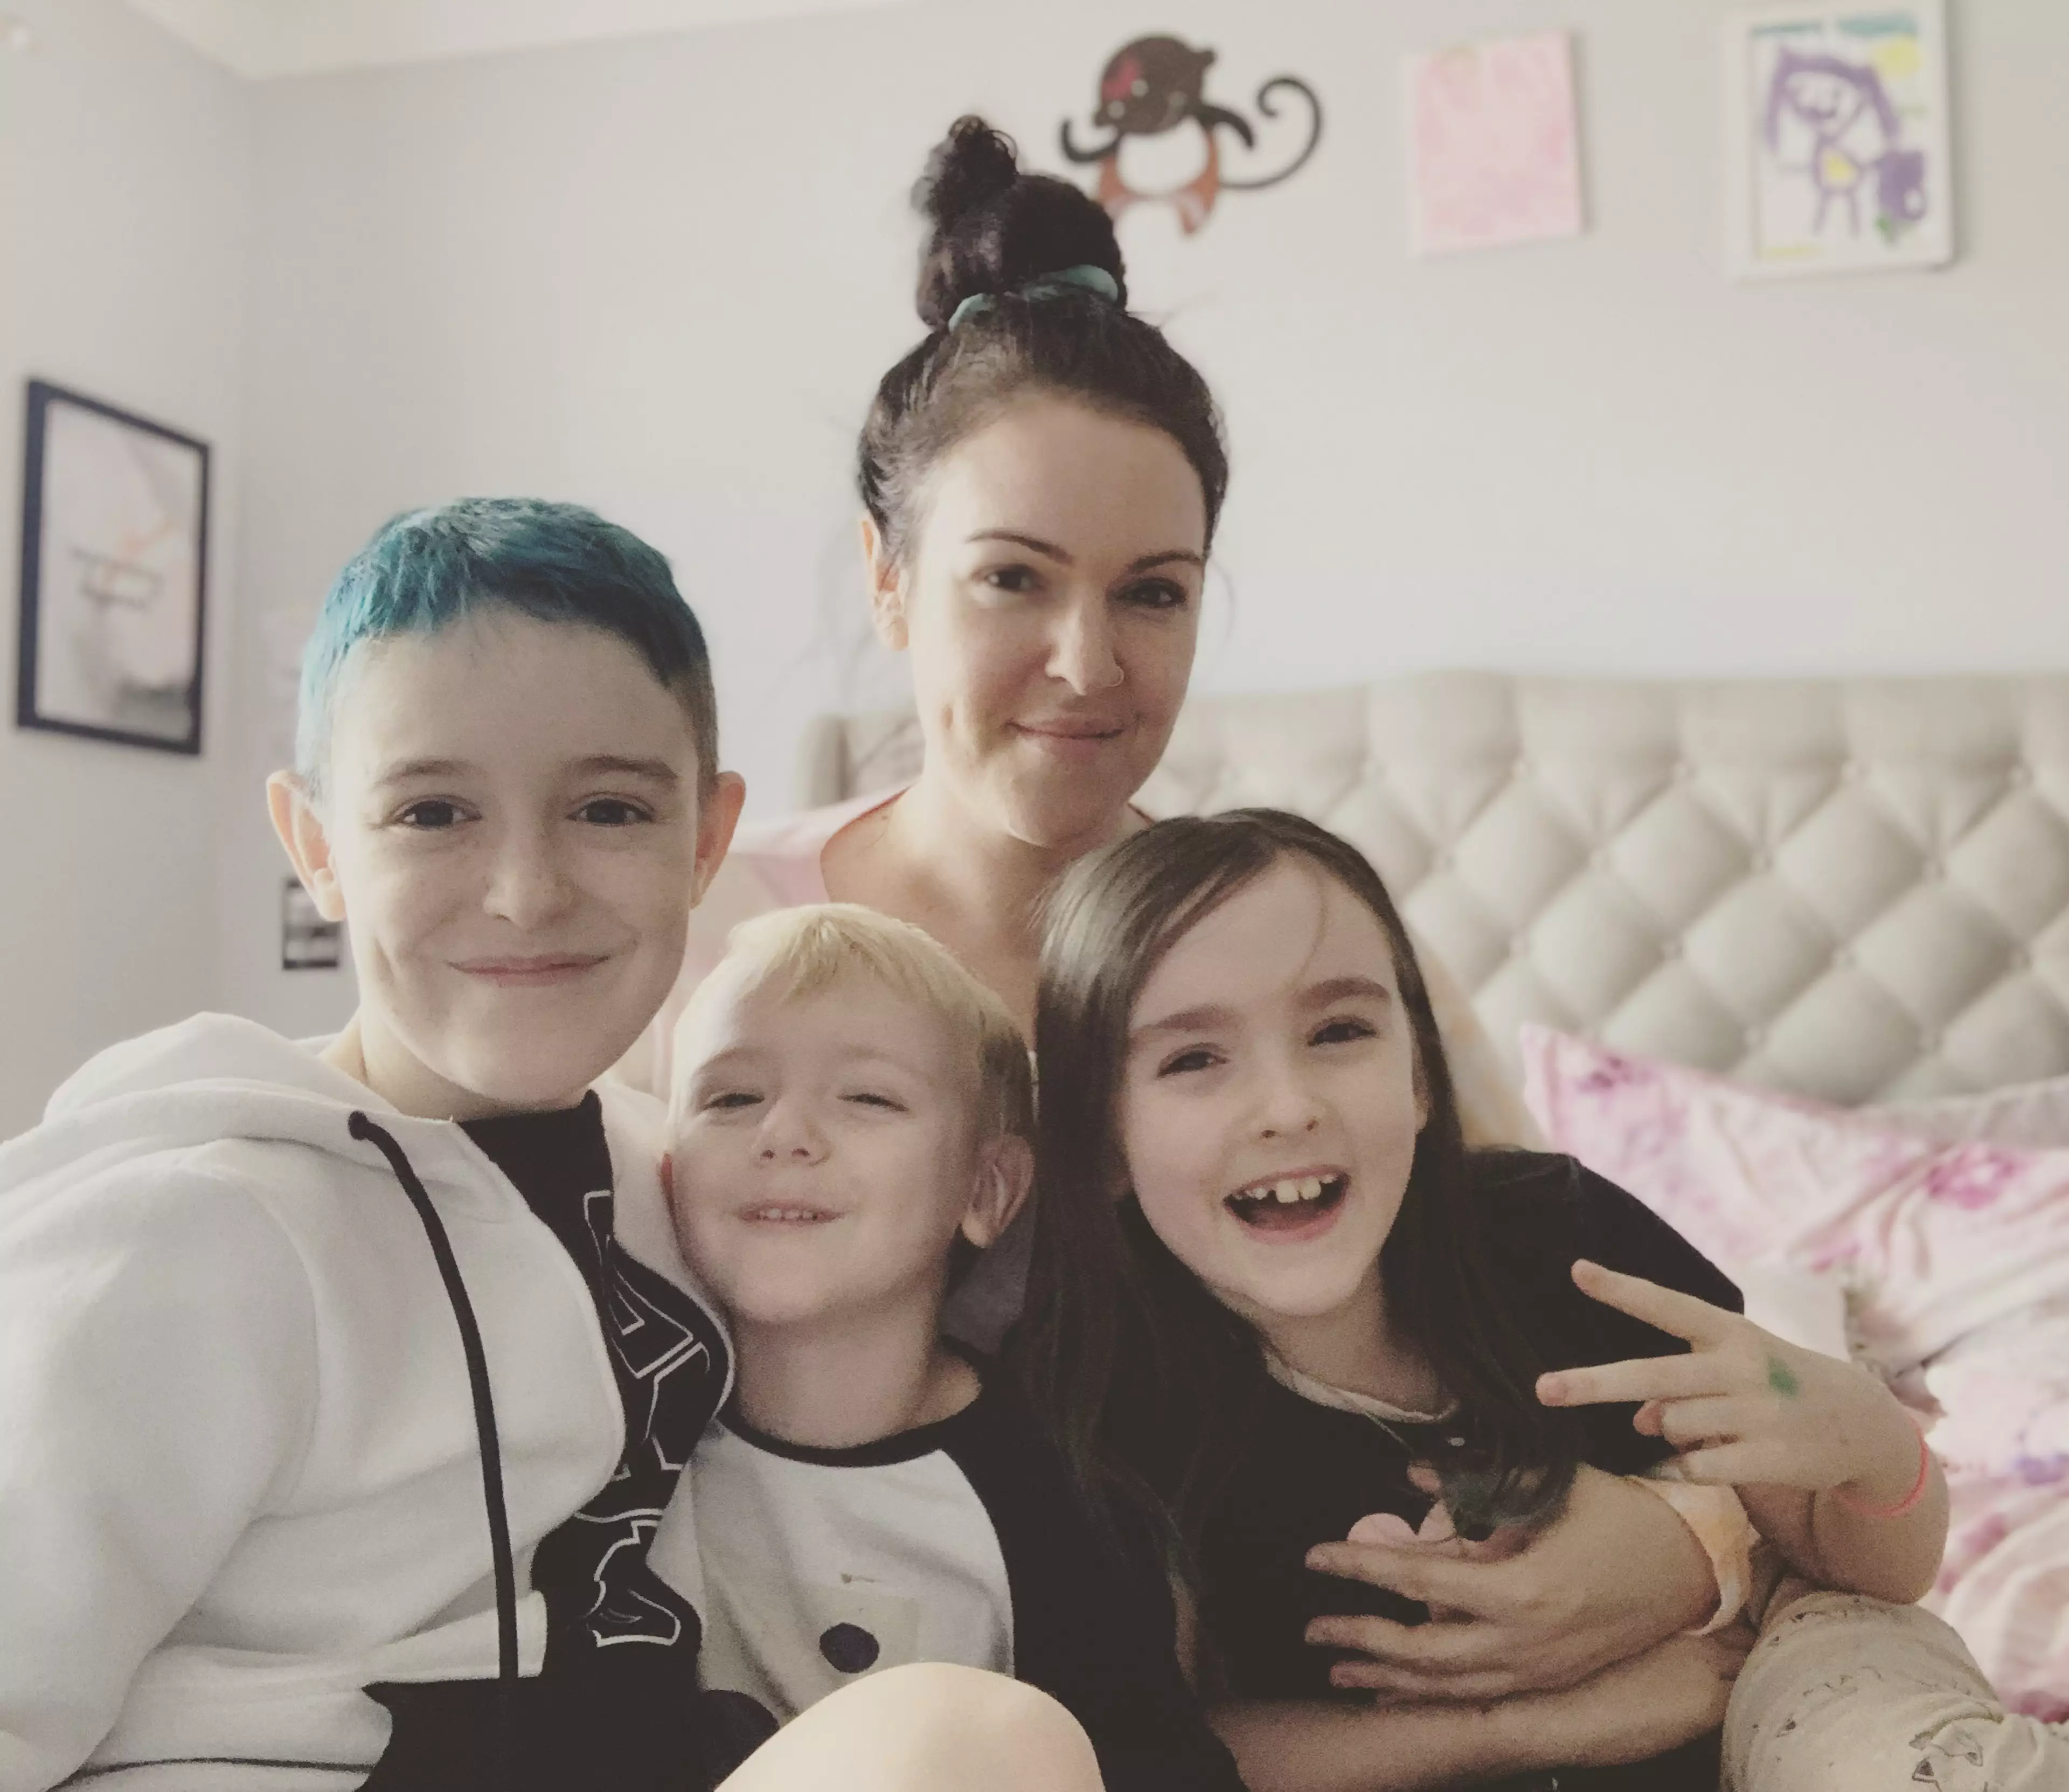 Sarah has three children - Hendrix, 10, Monroe, seven, and Morrison, three - two of whom have been diagnosed with autism (